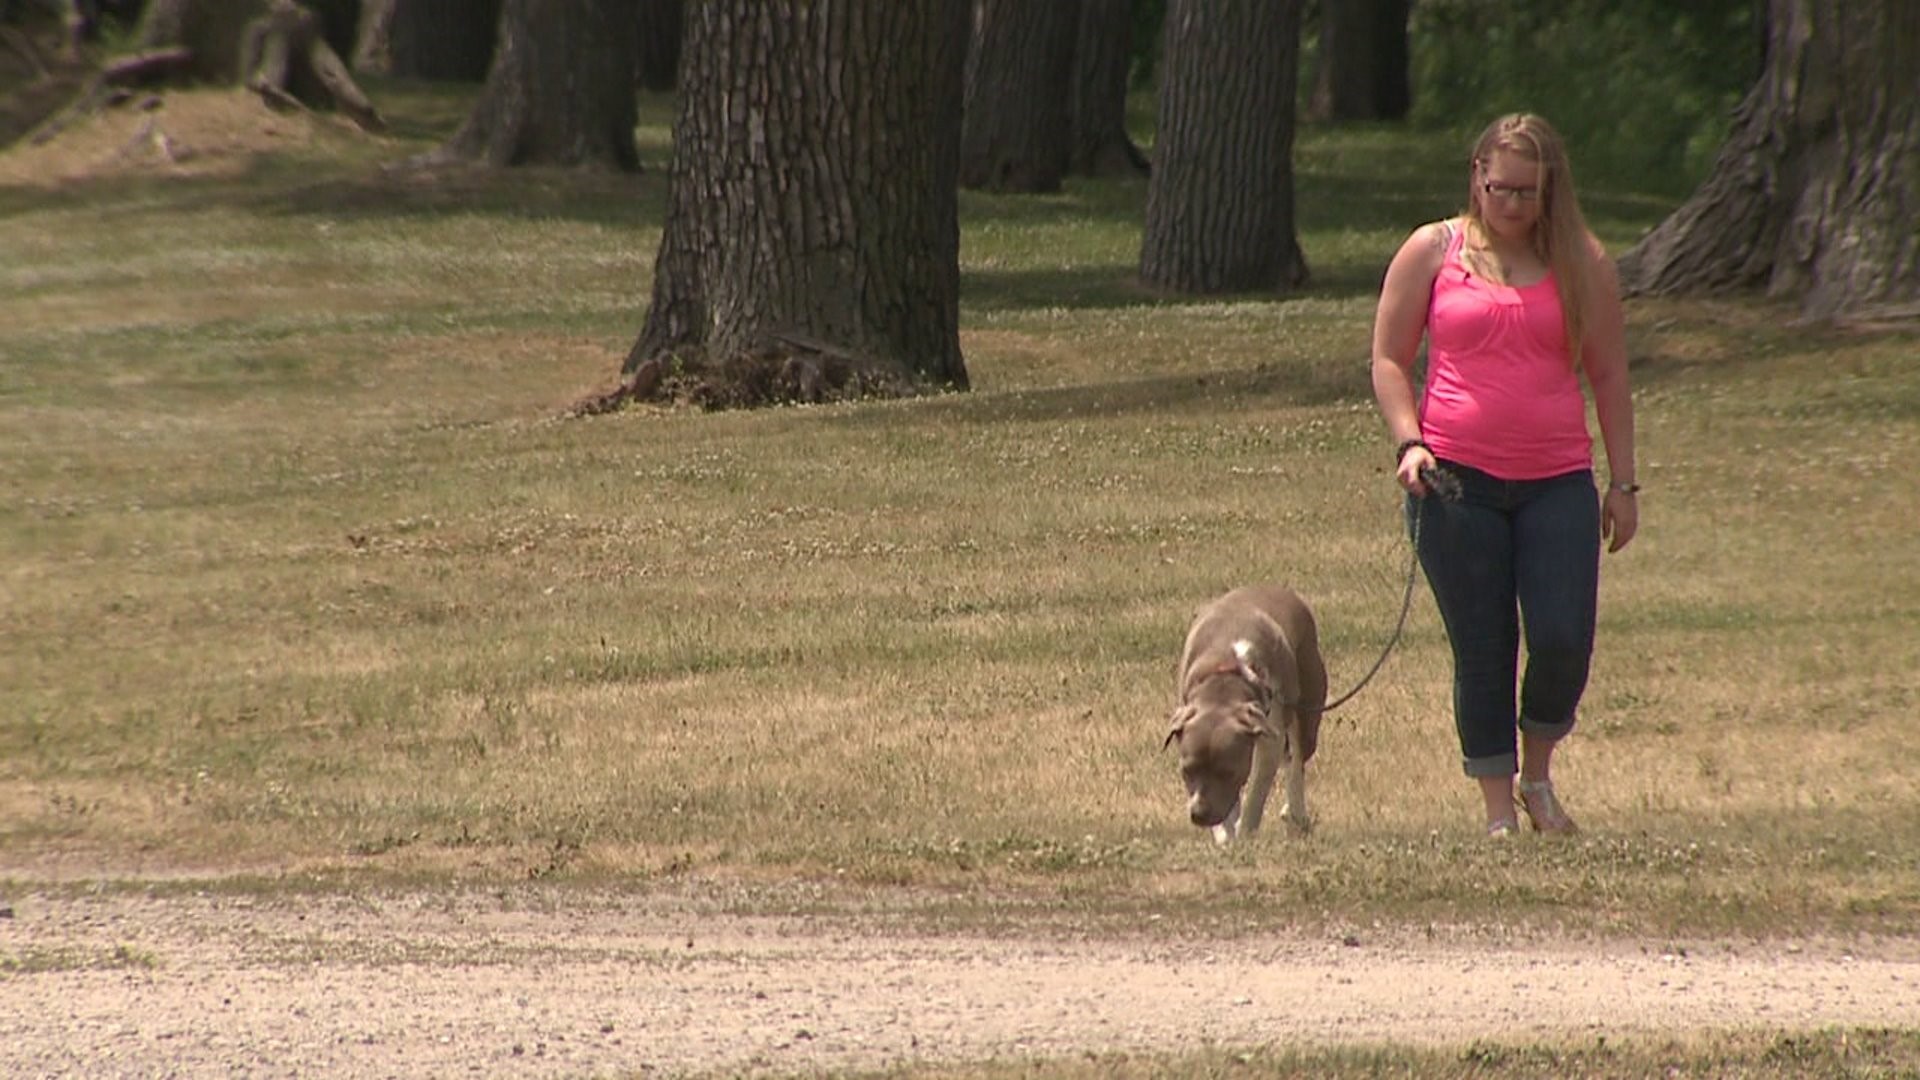 Colona woman chased by coyote while out walking her dog